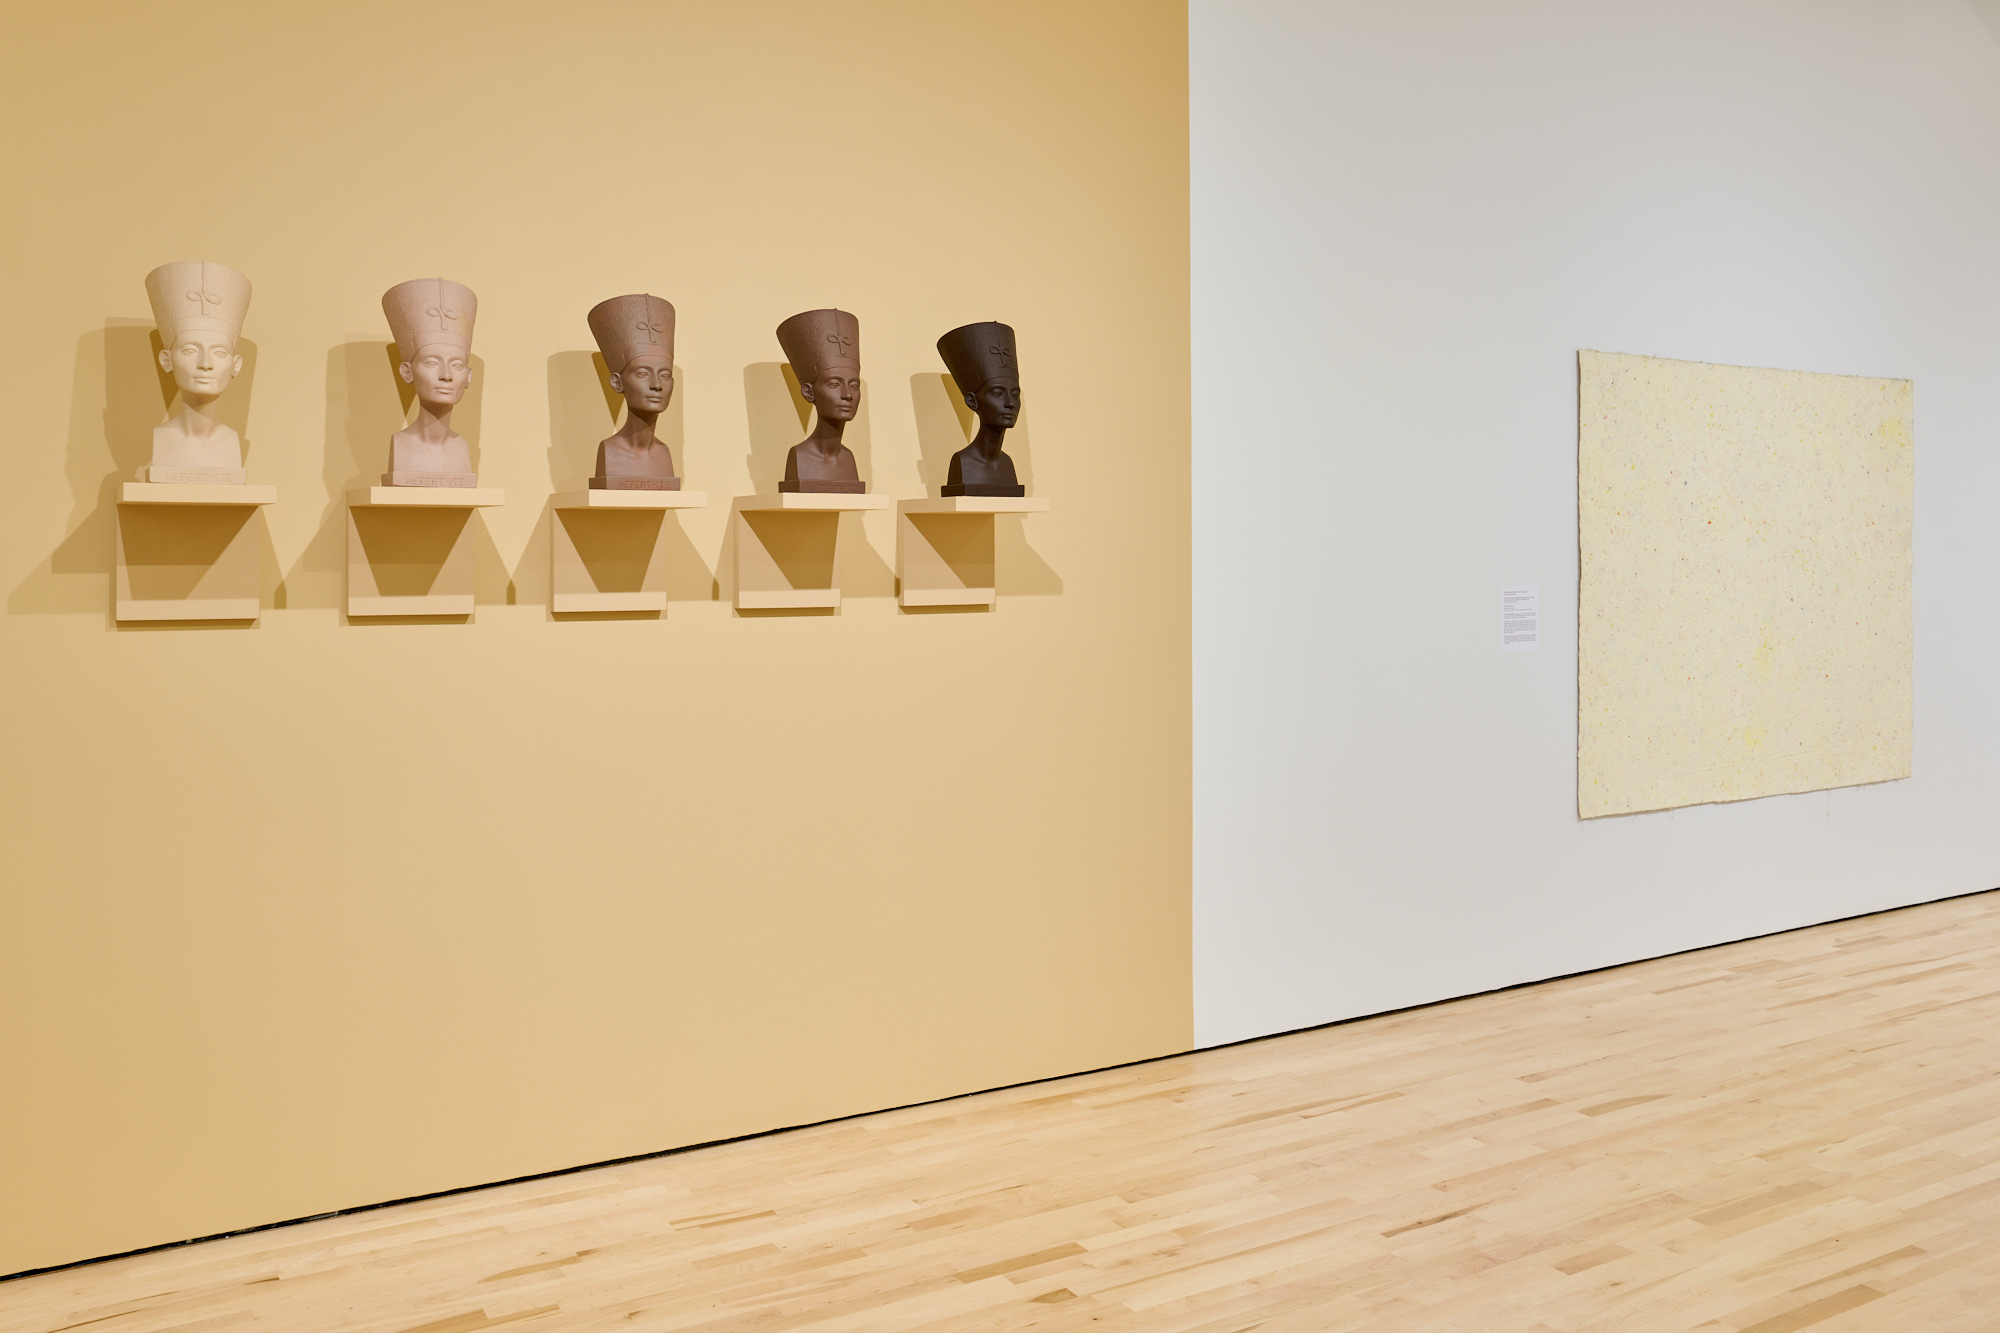 Beige wall with six Nefertiti statues in different skin tones on small shelves, light yellow abstract painting at right